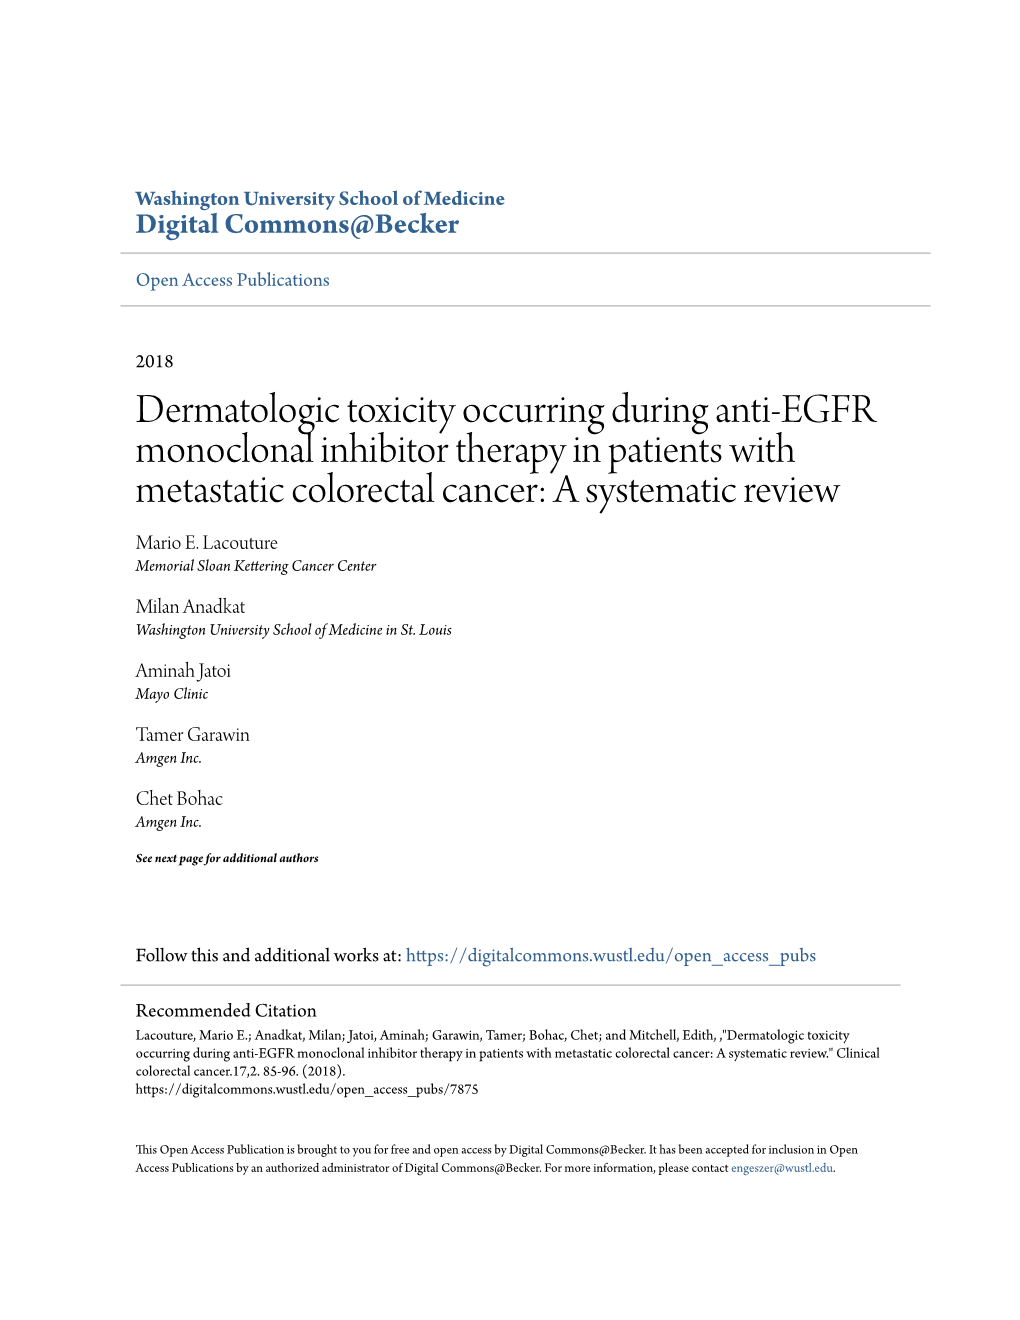 Dermatologic Toxicity Occurring During Anti-EGFR Monoclonal Inhibitor Therapy in Patients with Metastatic Colorectal Cancer: a Systematic Review Mario E